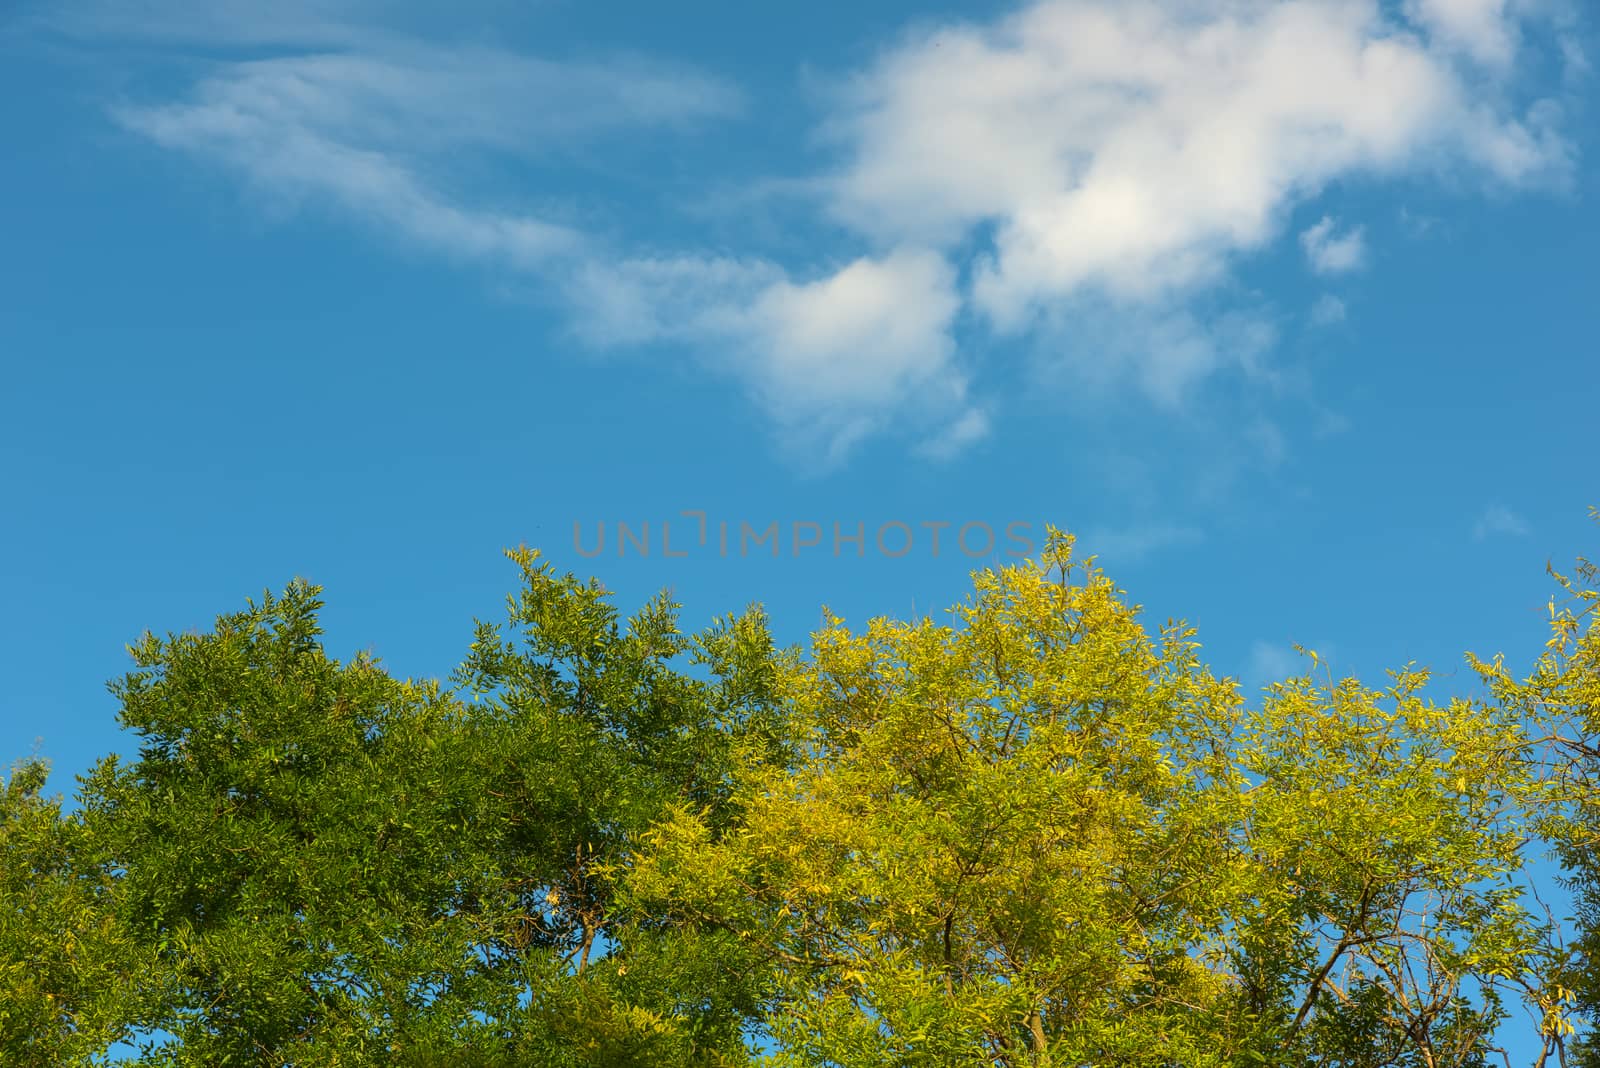 Autumn leaves and blue sky by Robertobinetti70